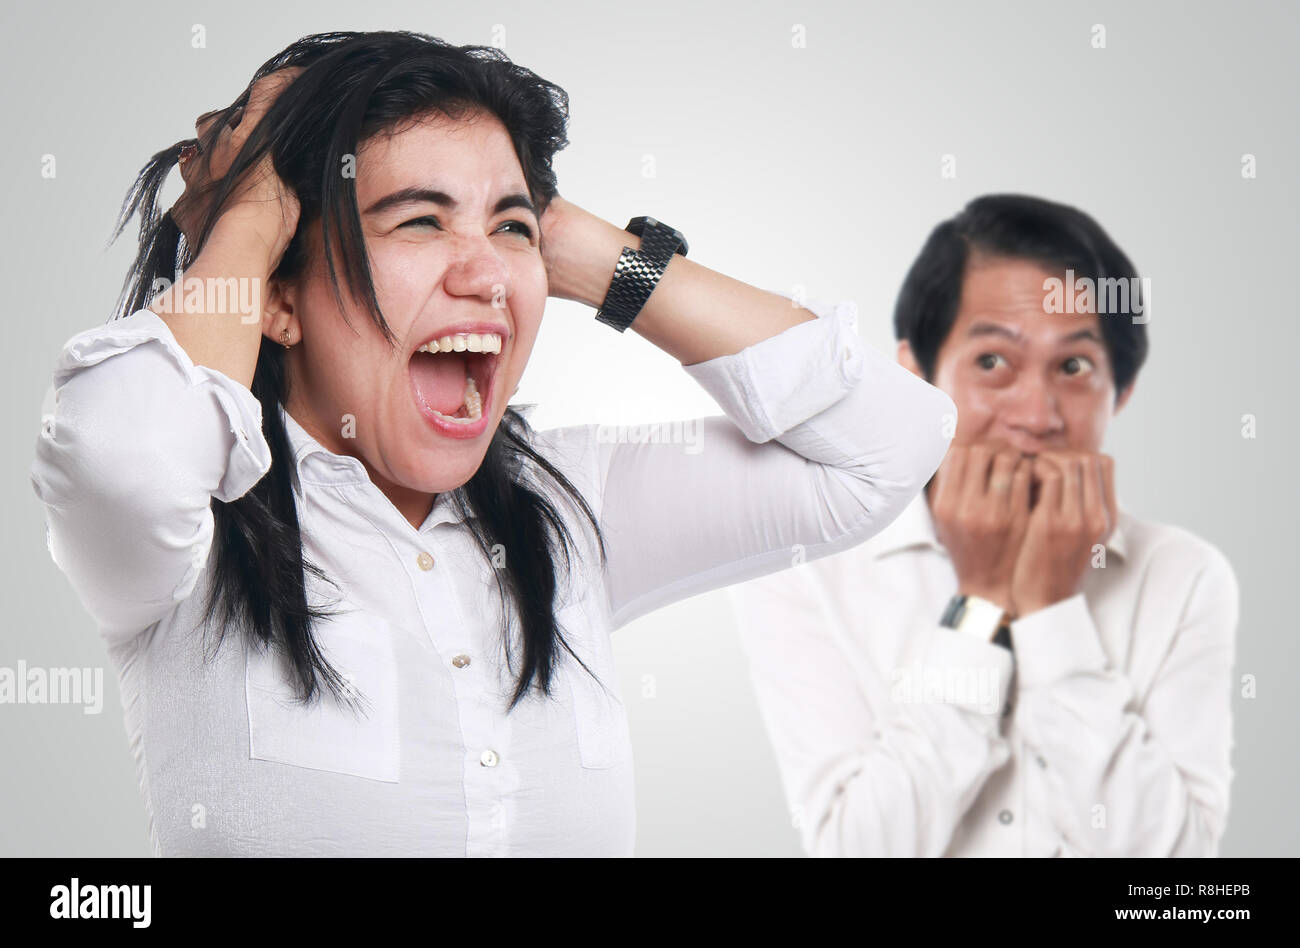 Photo image of a mad Asian businesswoman screaming while a scared man looked worried in the background, crazy couple concept Stock Photo